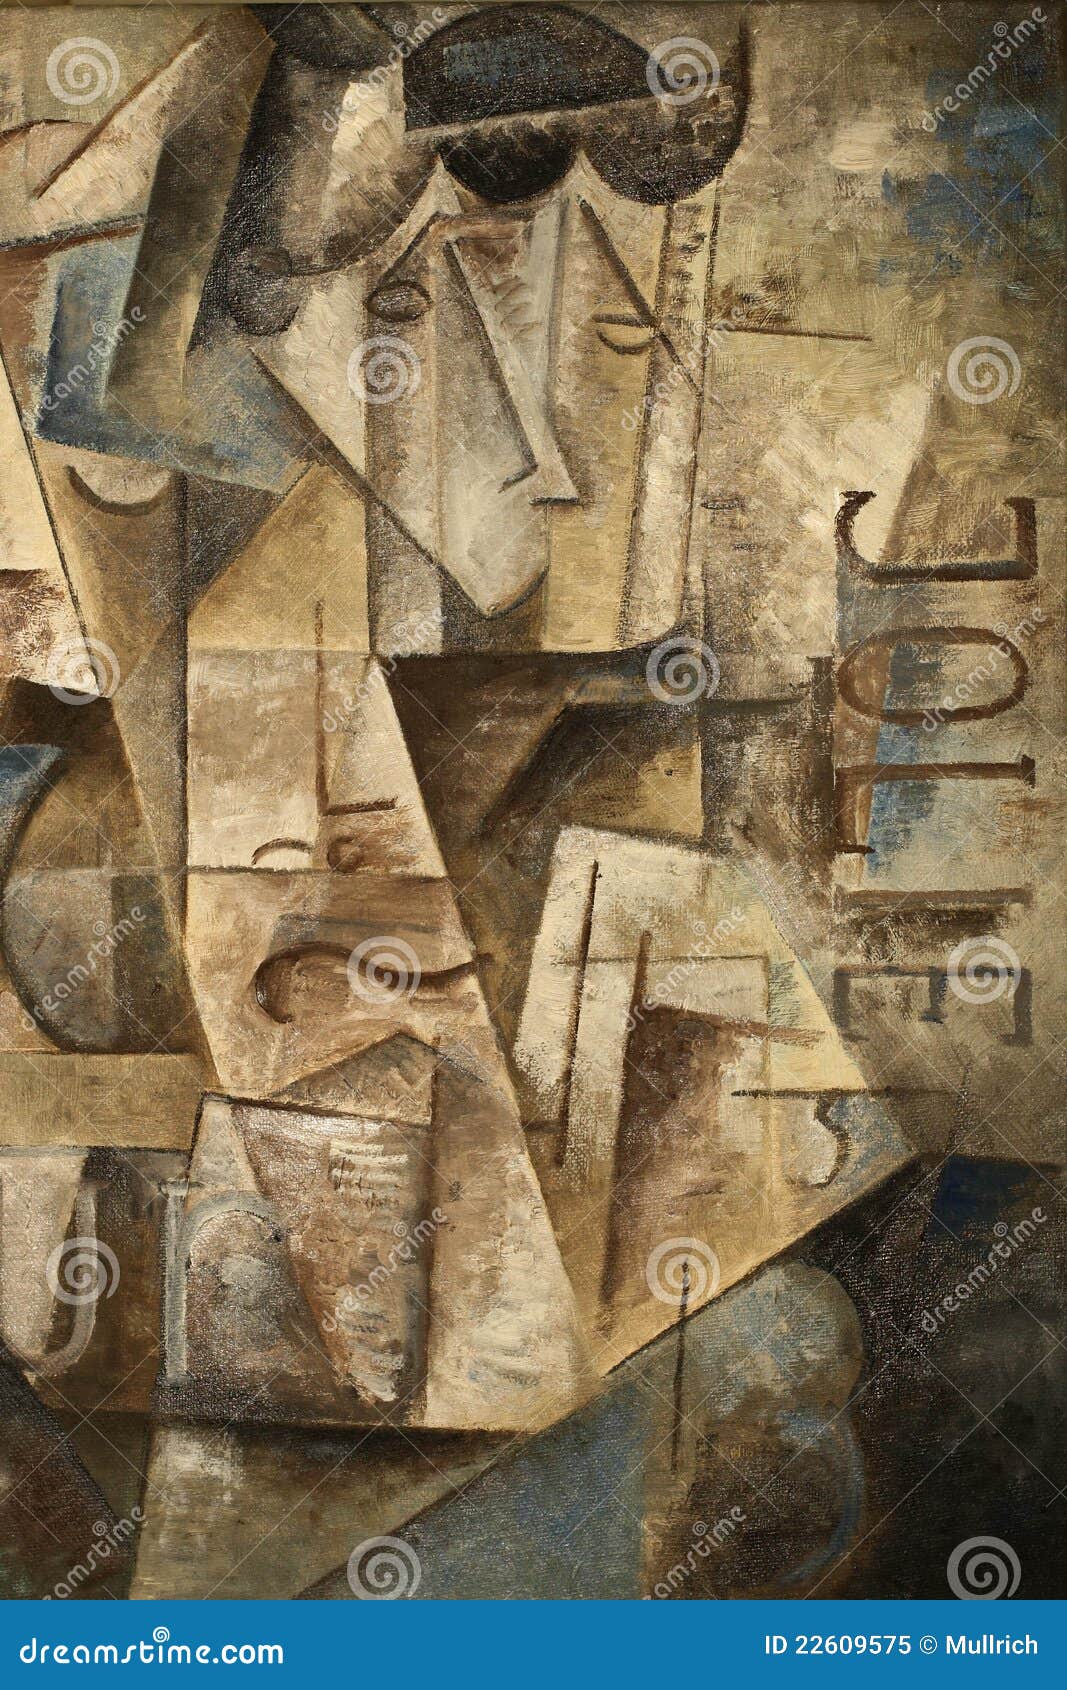 Abstract Cubism Oil Painting Royalty Free Stock Photo - Image: 22609575